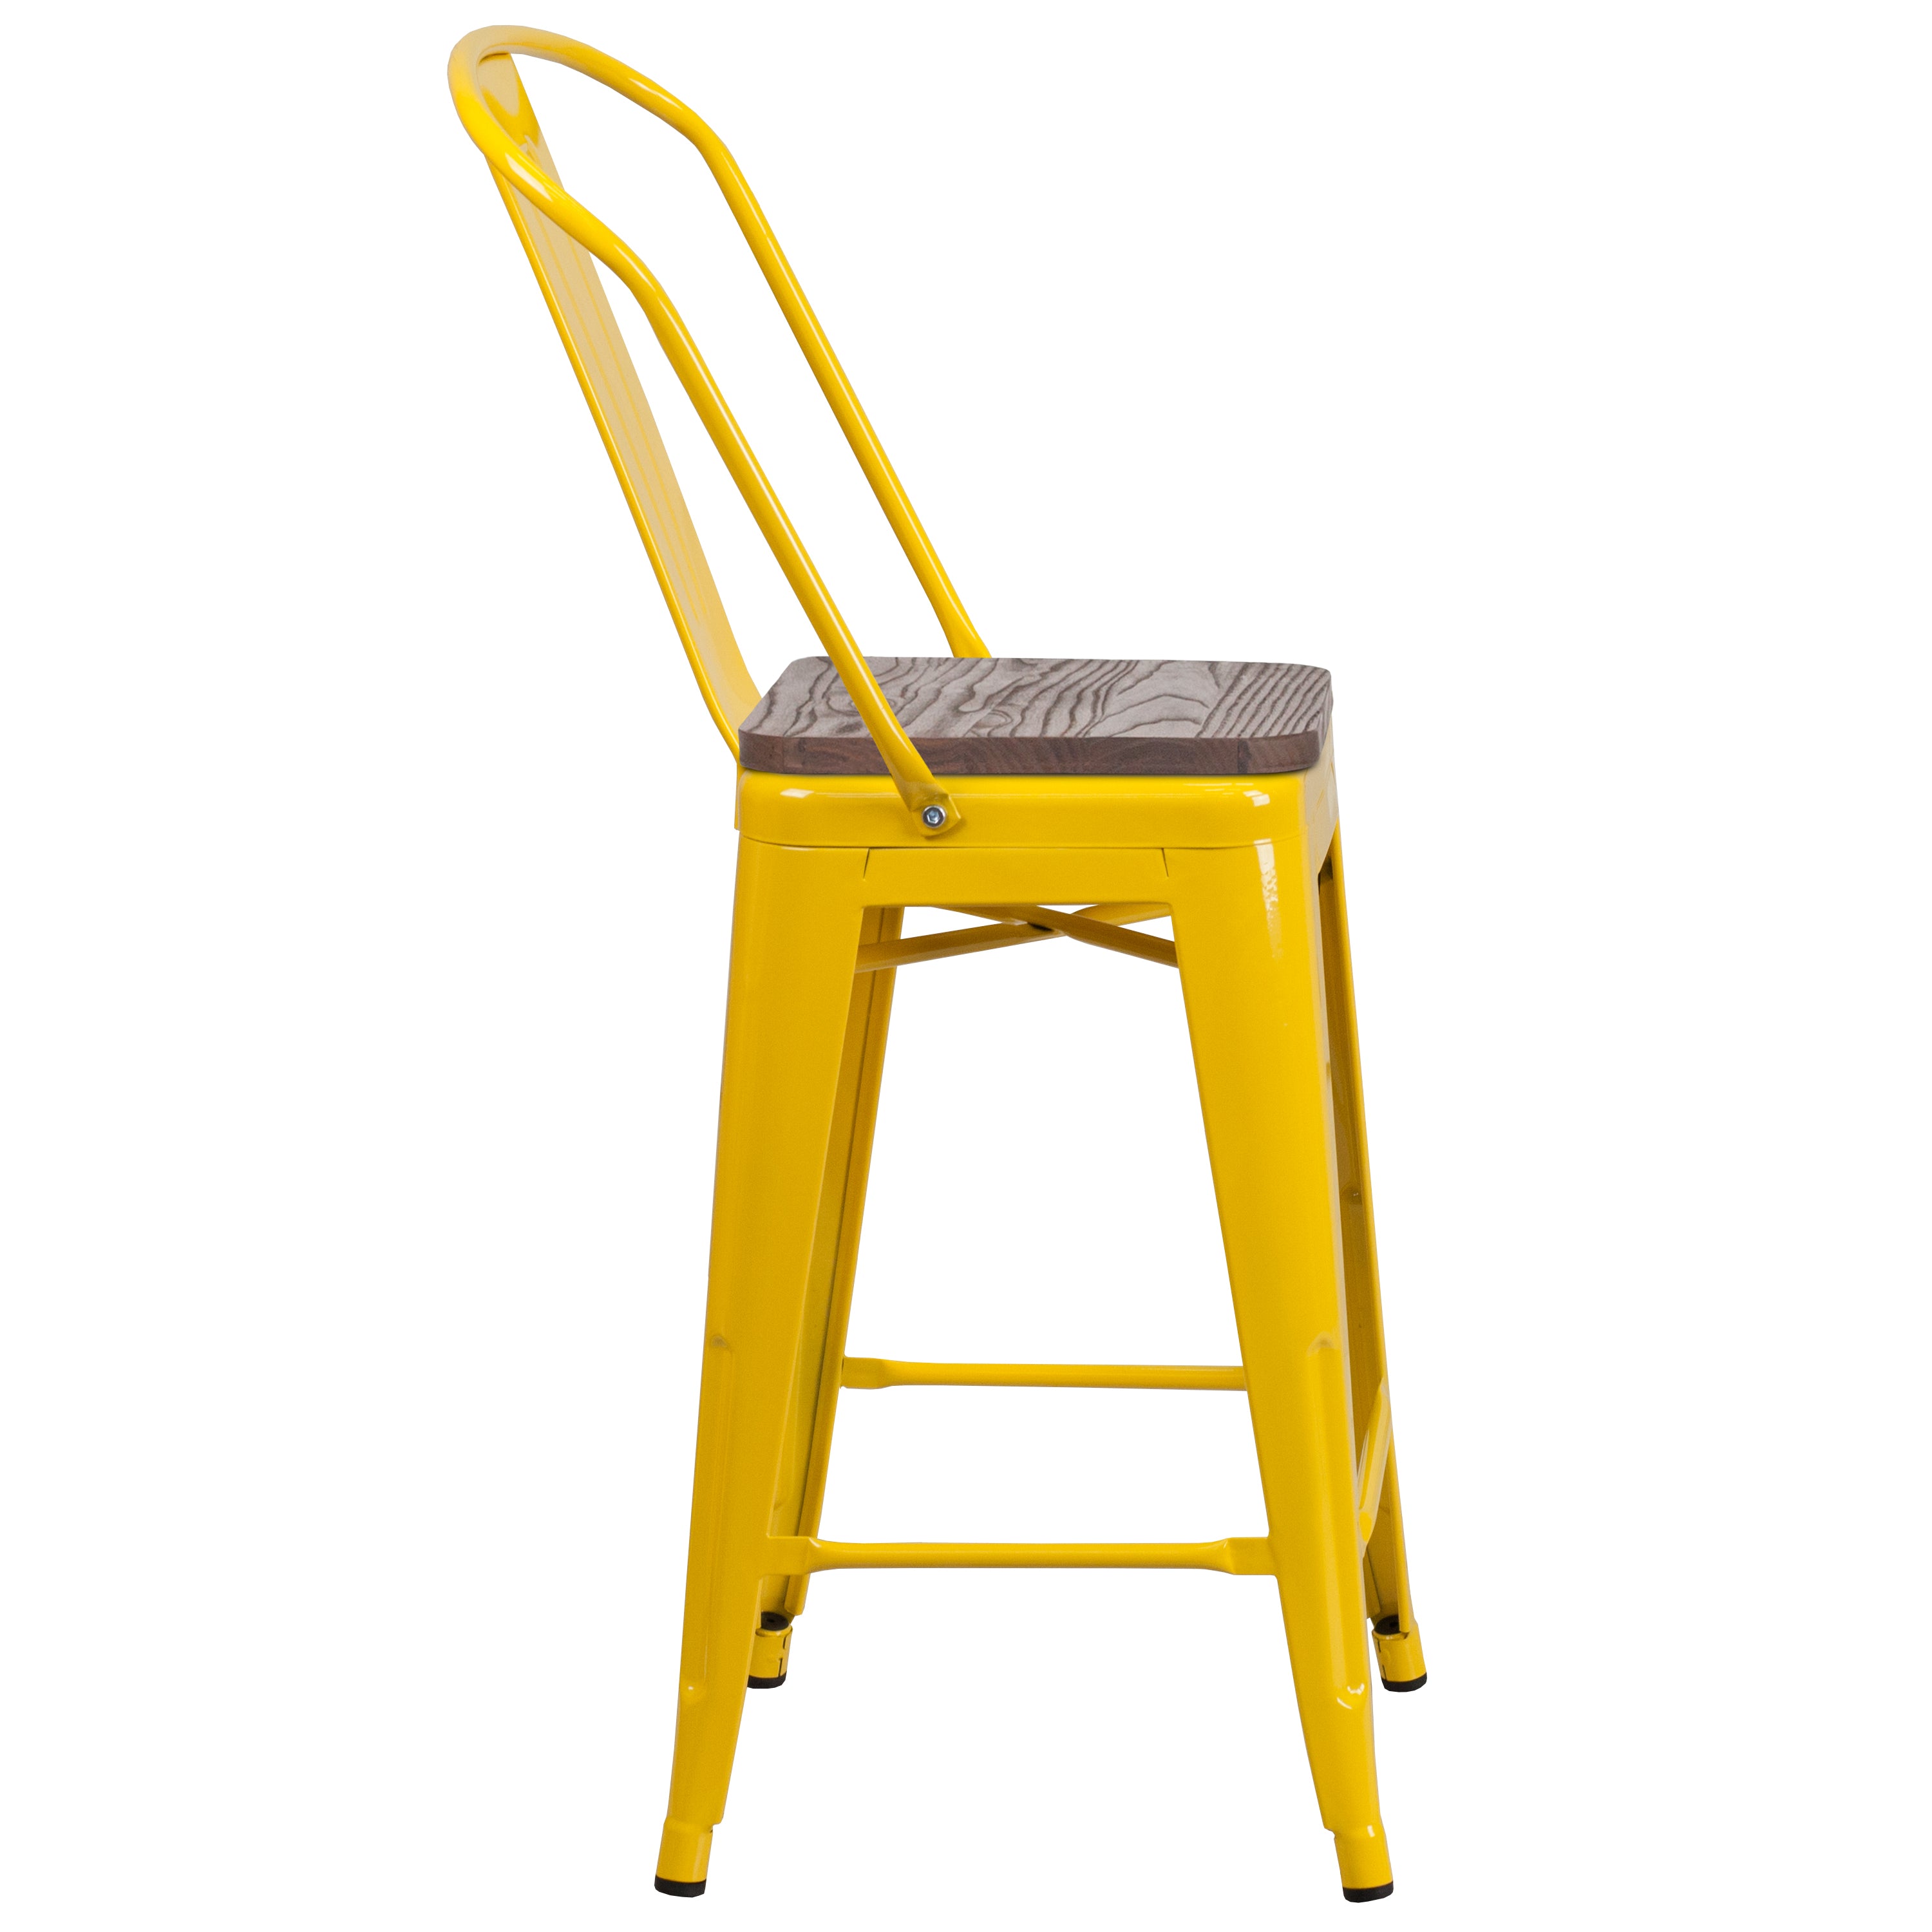 24" High Metal Counter Height Stool with Back and Wood Seat-Metal/ Colorful Restaurant Counter Stool-Flash Furniture-Wall2Wall Furnishings